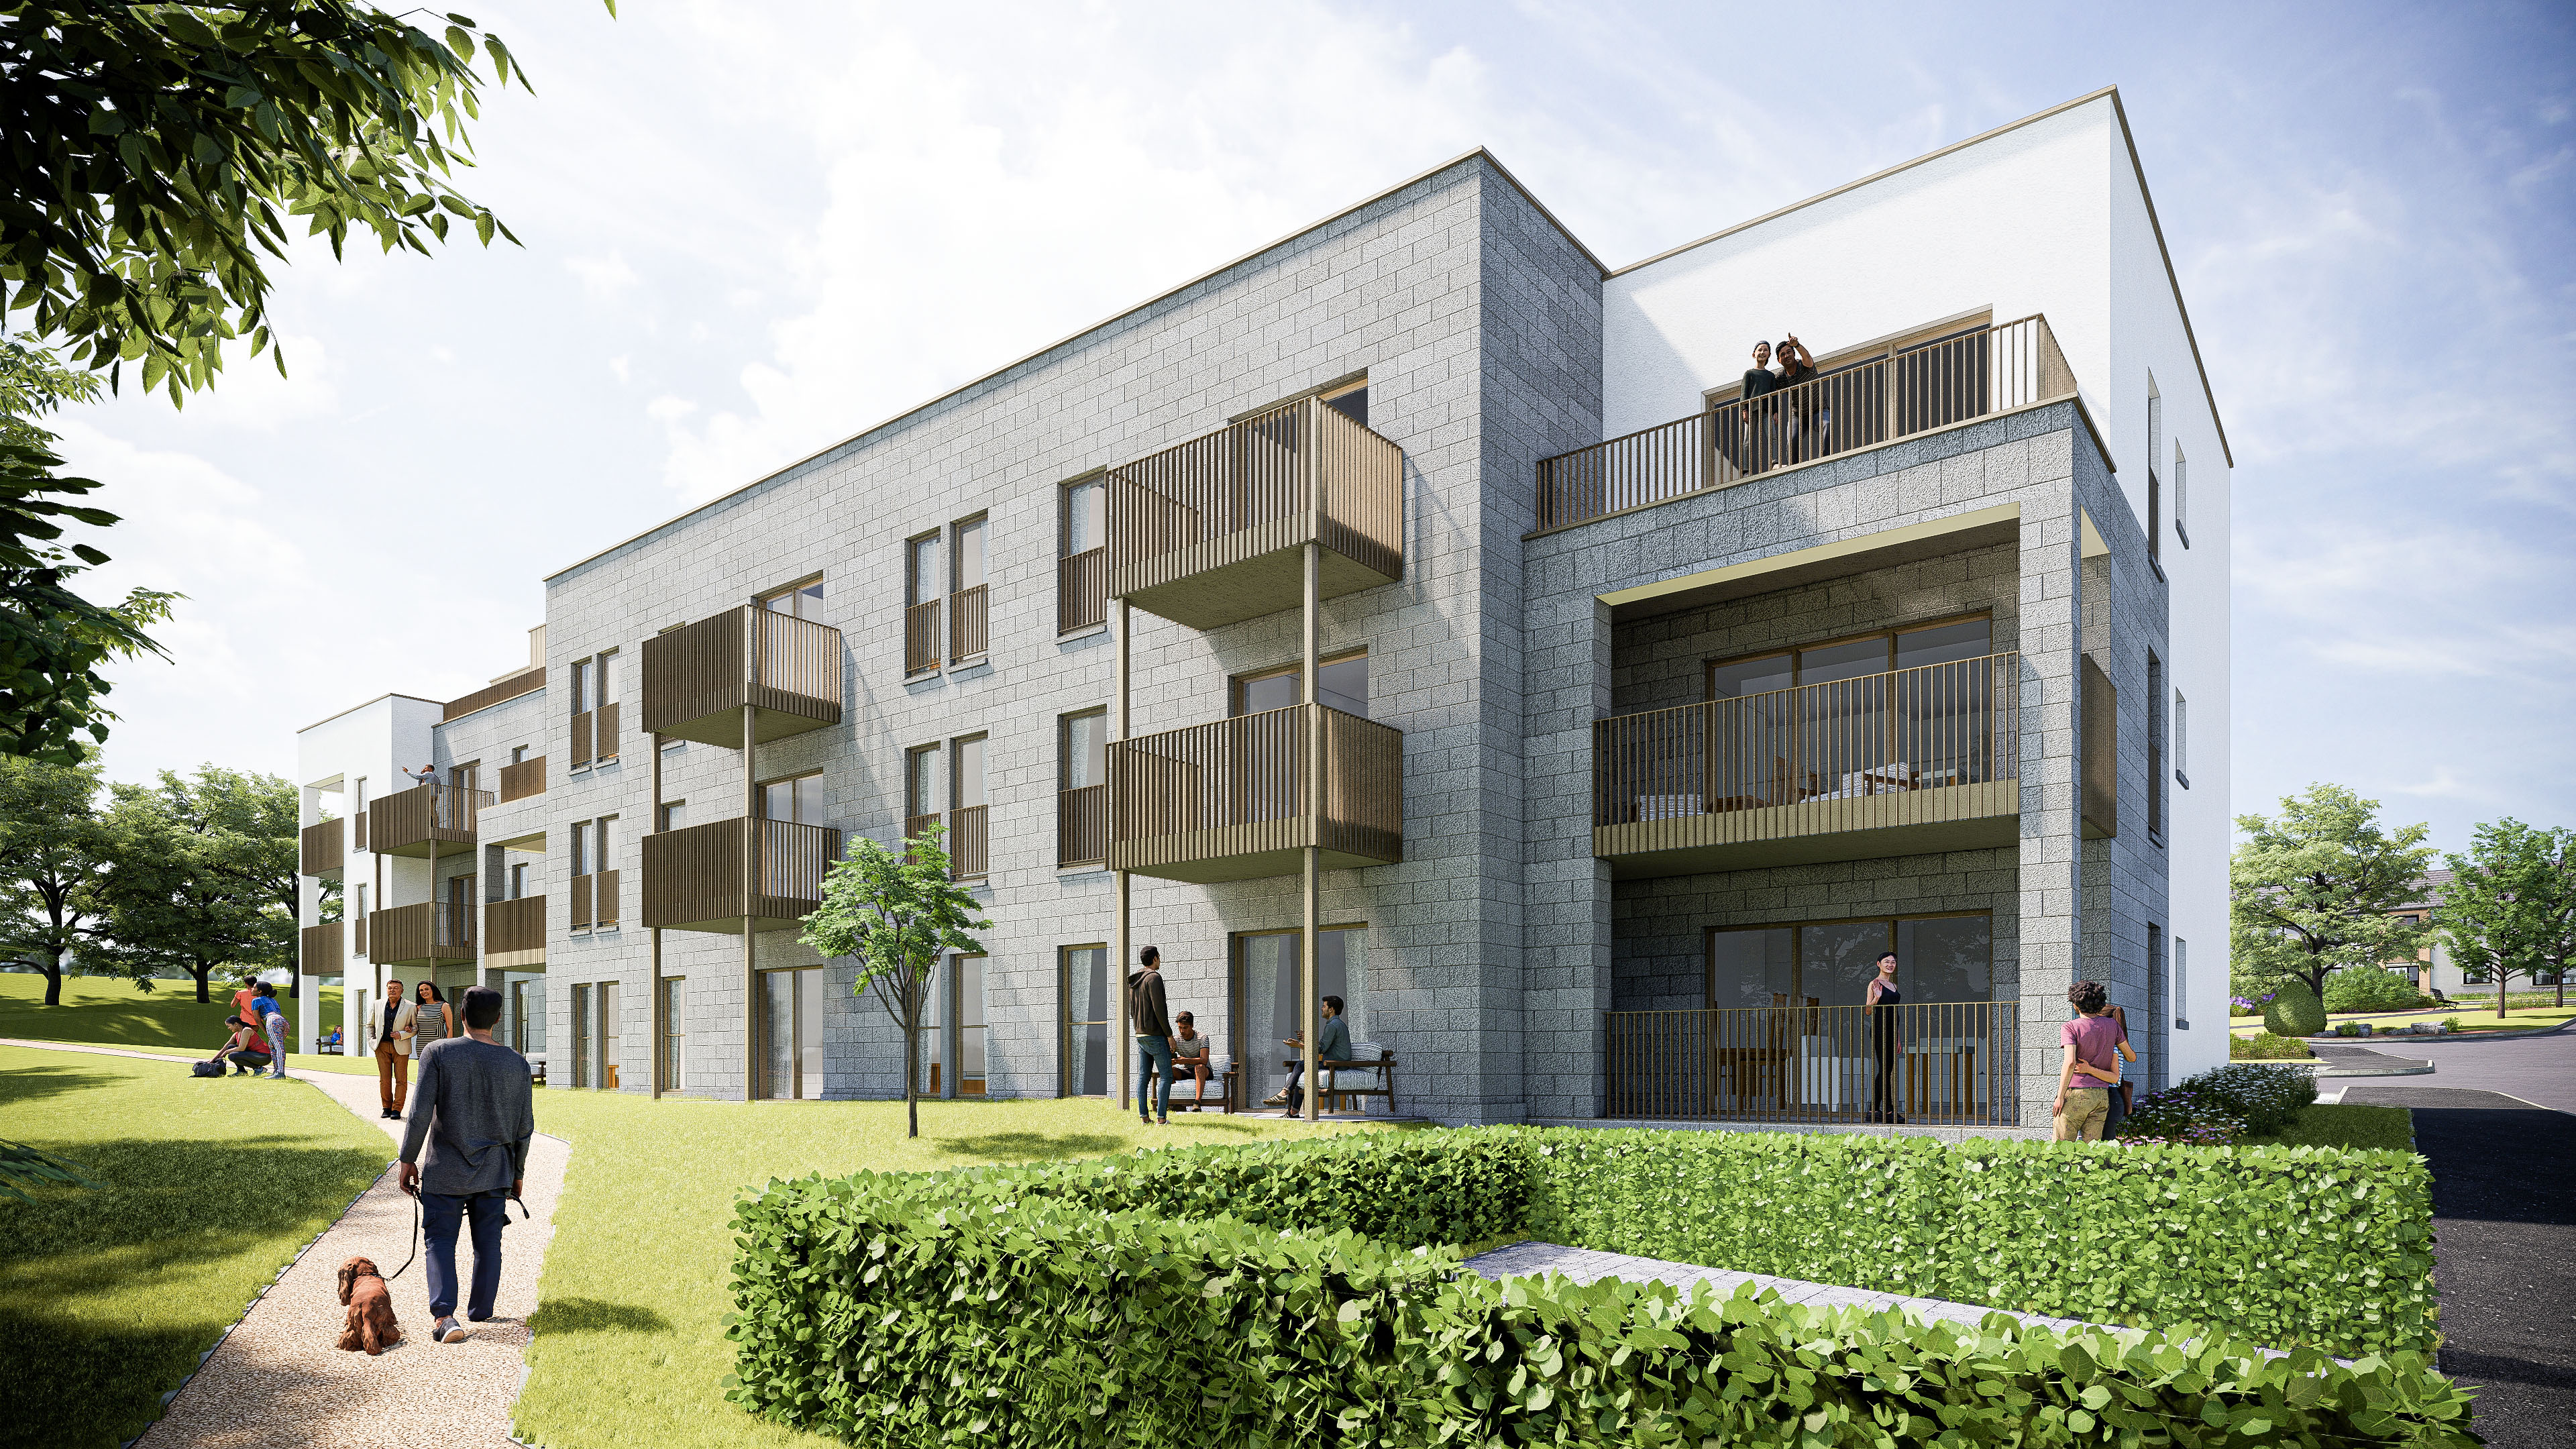 CALA Homes submits 'substantially revised' plans for Aberdeen development